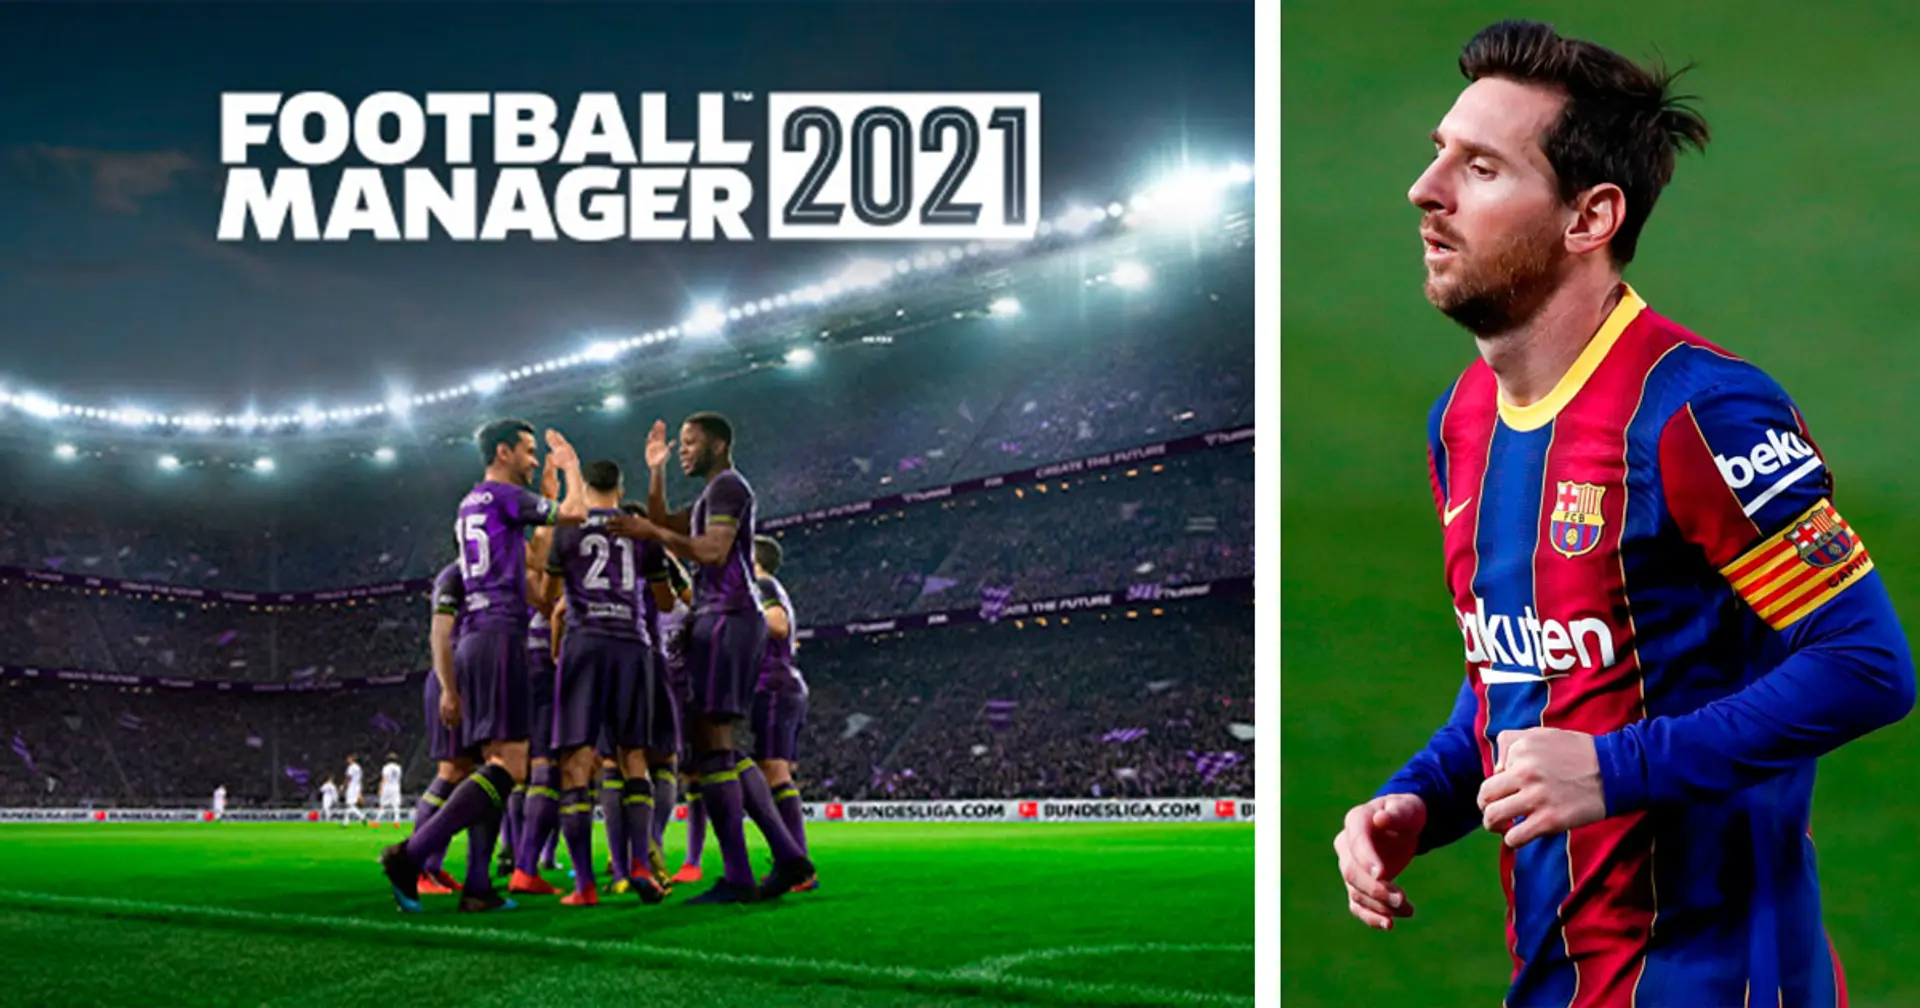 I decided NOT to extend Messi's contract on Football Manager 2021 — and here's what happened